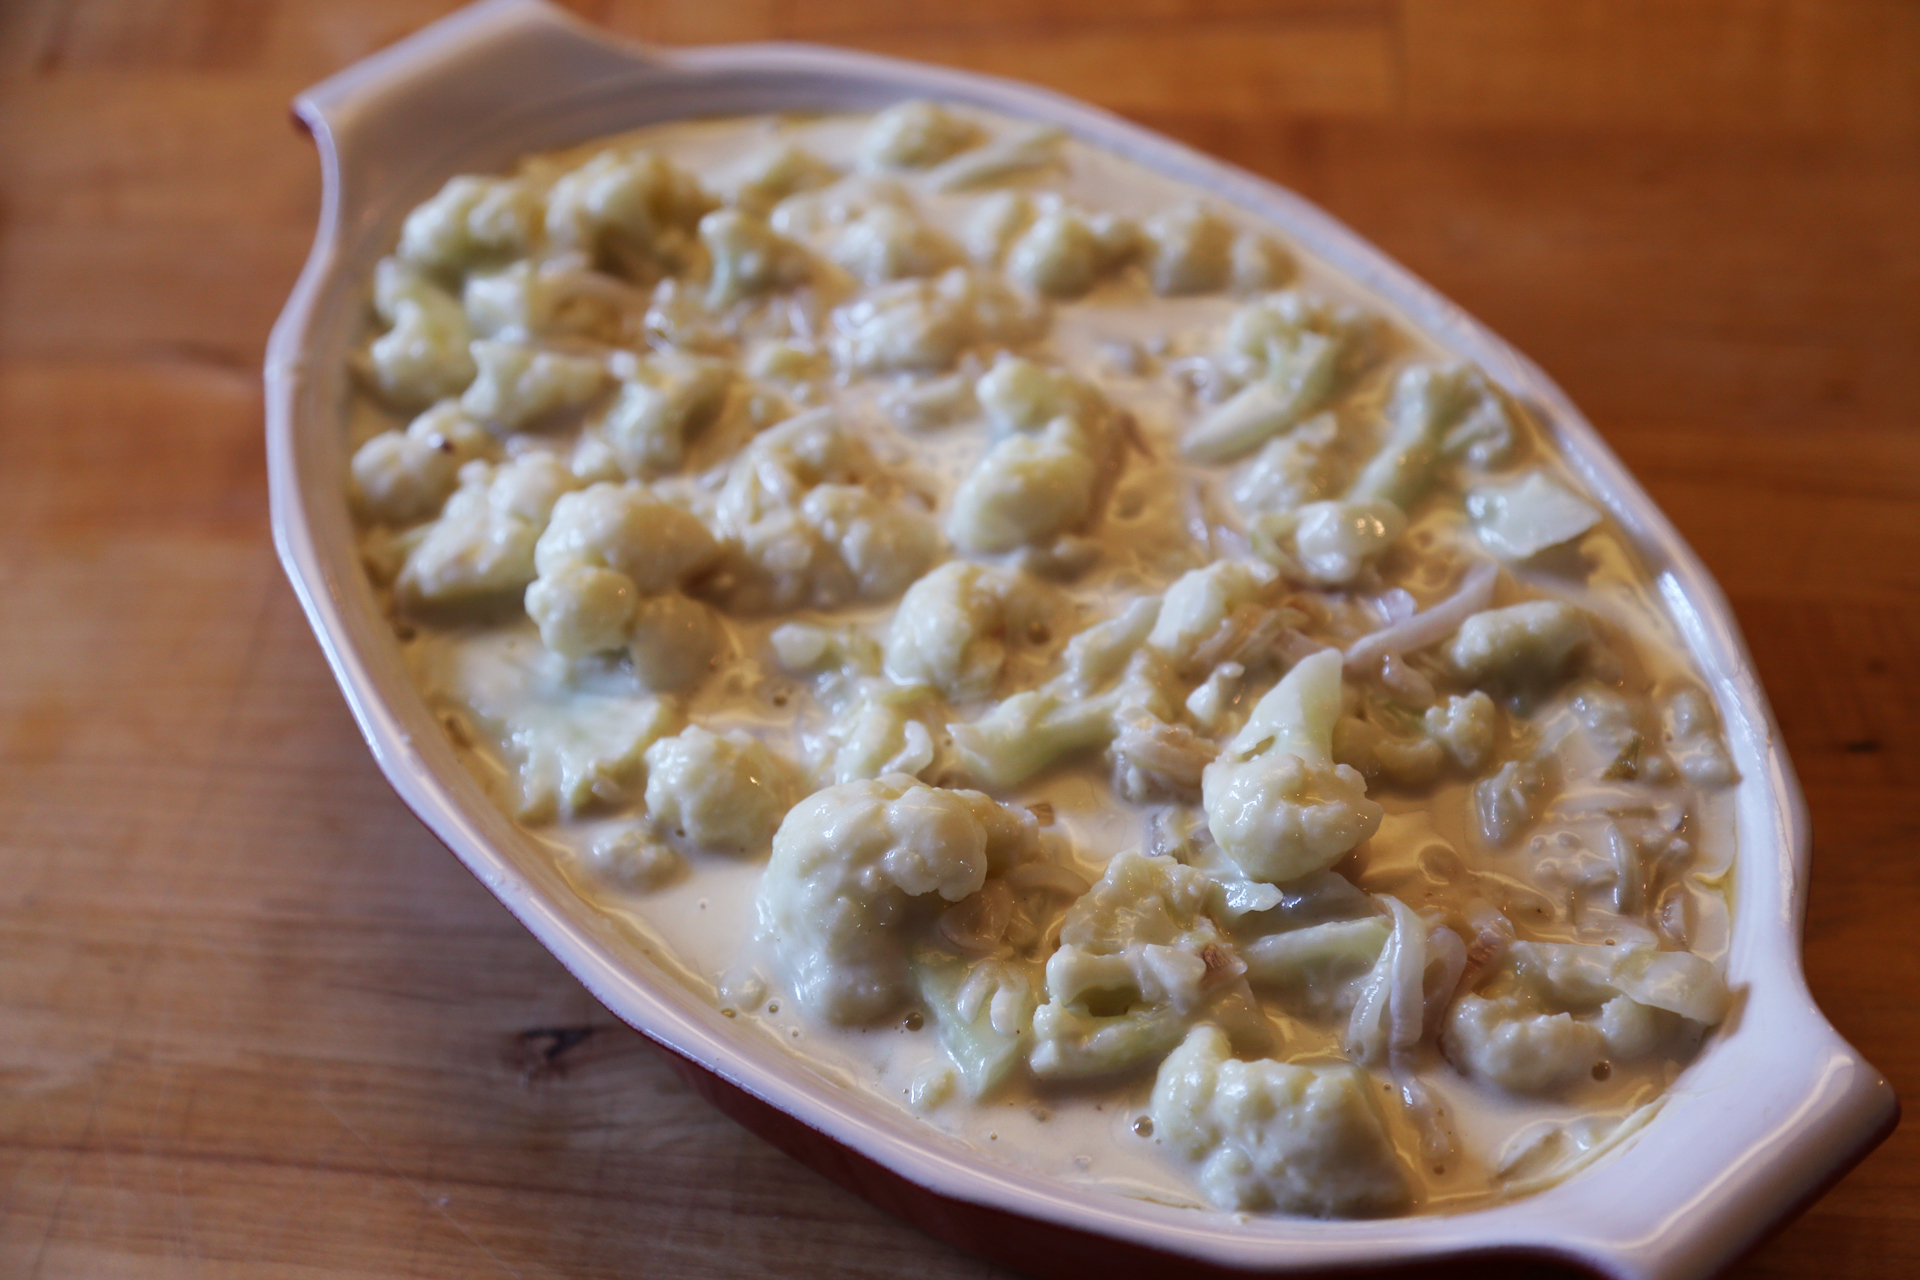 Grease a 2-qt gratin dish or baking dish. Spread the cauliflower mixture into an even later in the dish. 